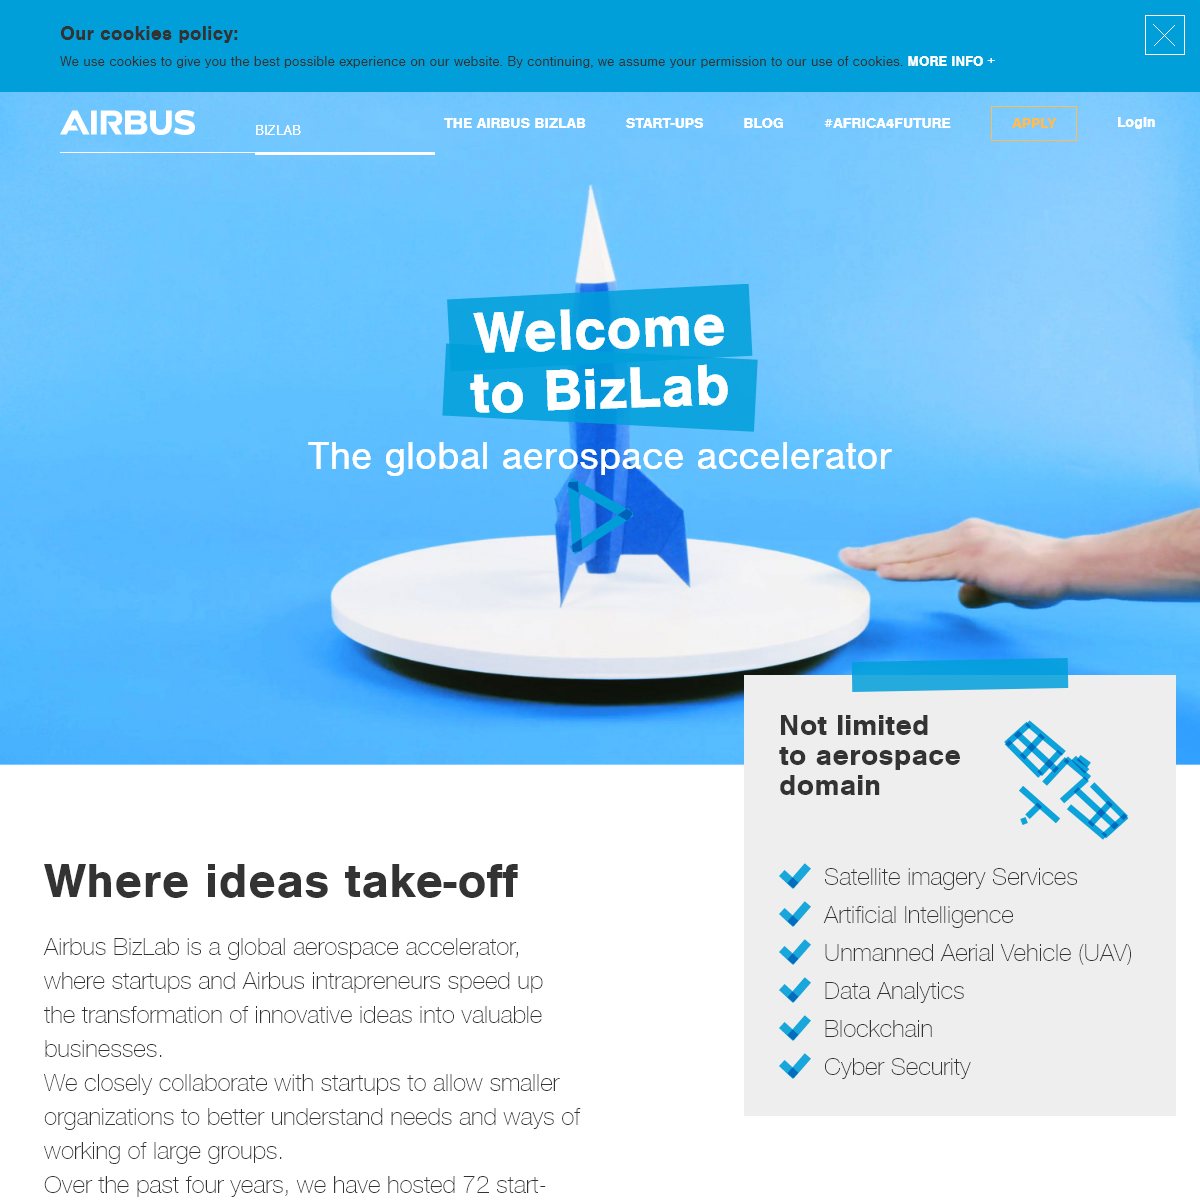 A complete backup of airbus-bizlab.com